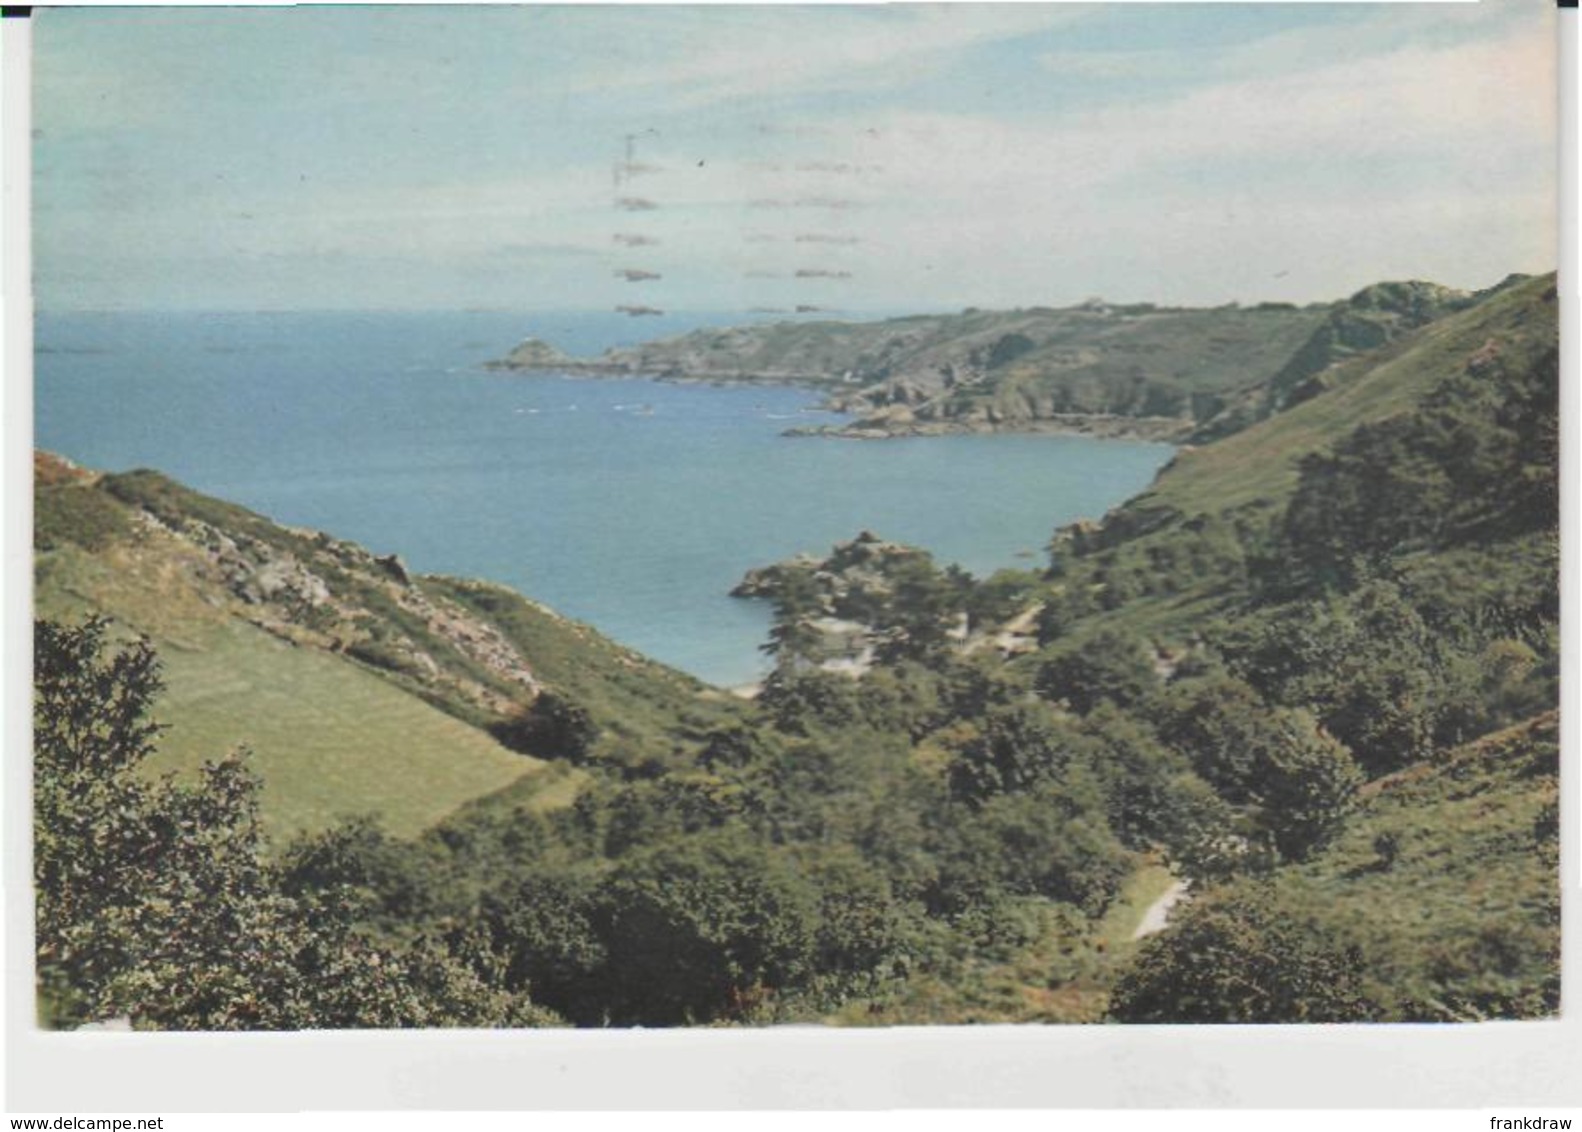 Postcard - Bouley Bay, Jersey - Posted 19th Aug 1958  Very Good - Non Classificati